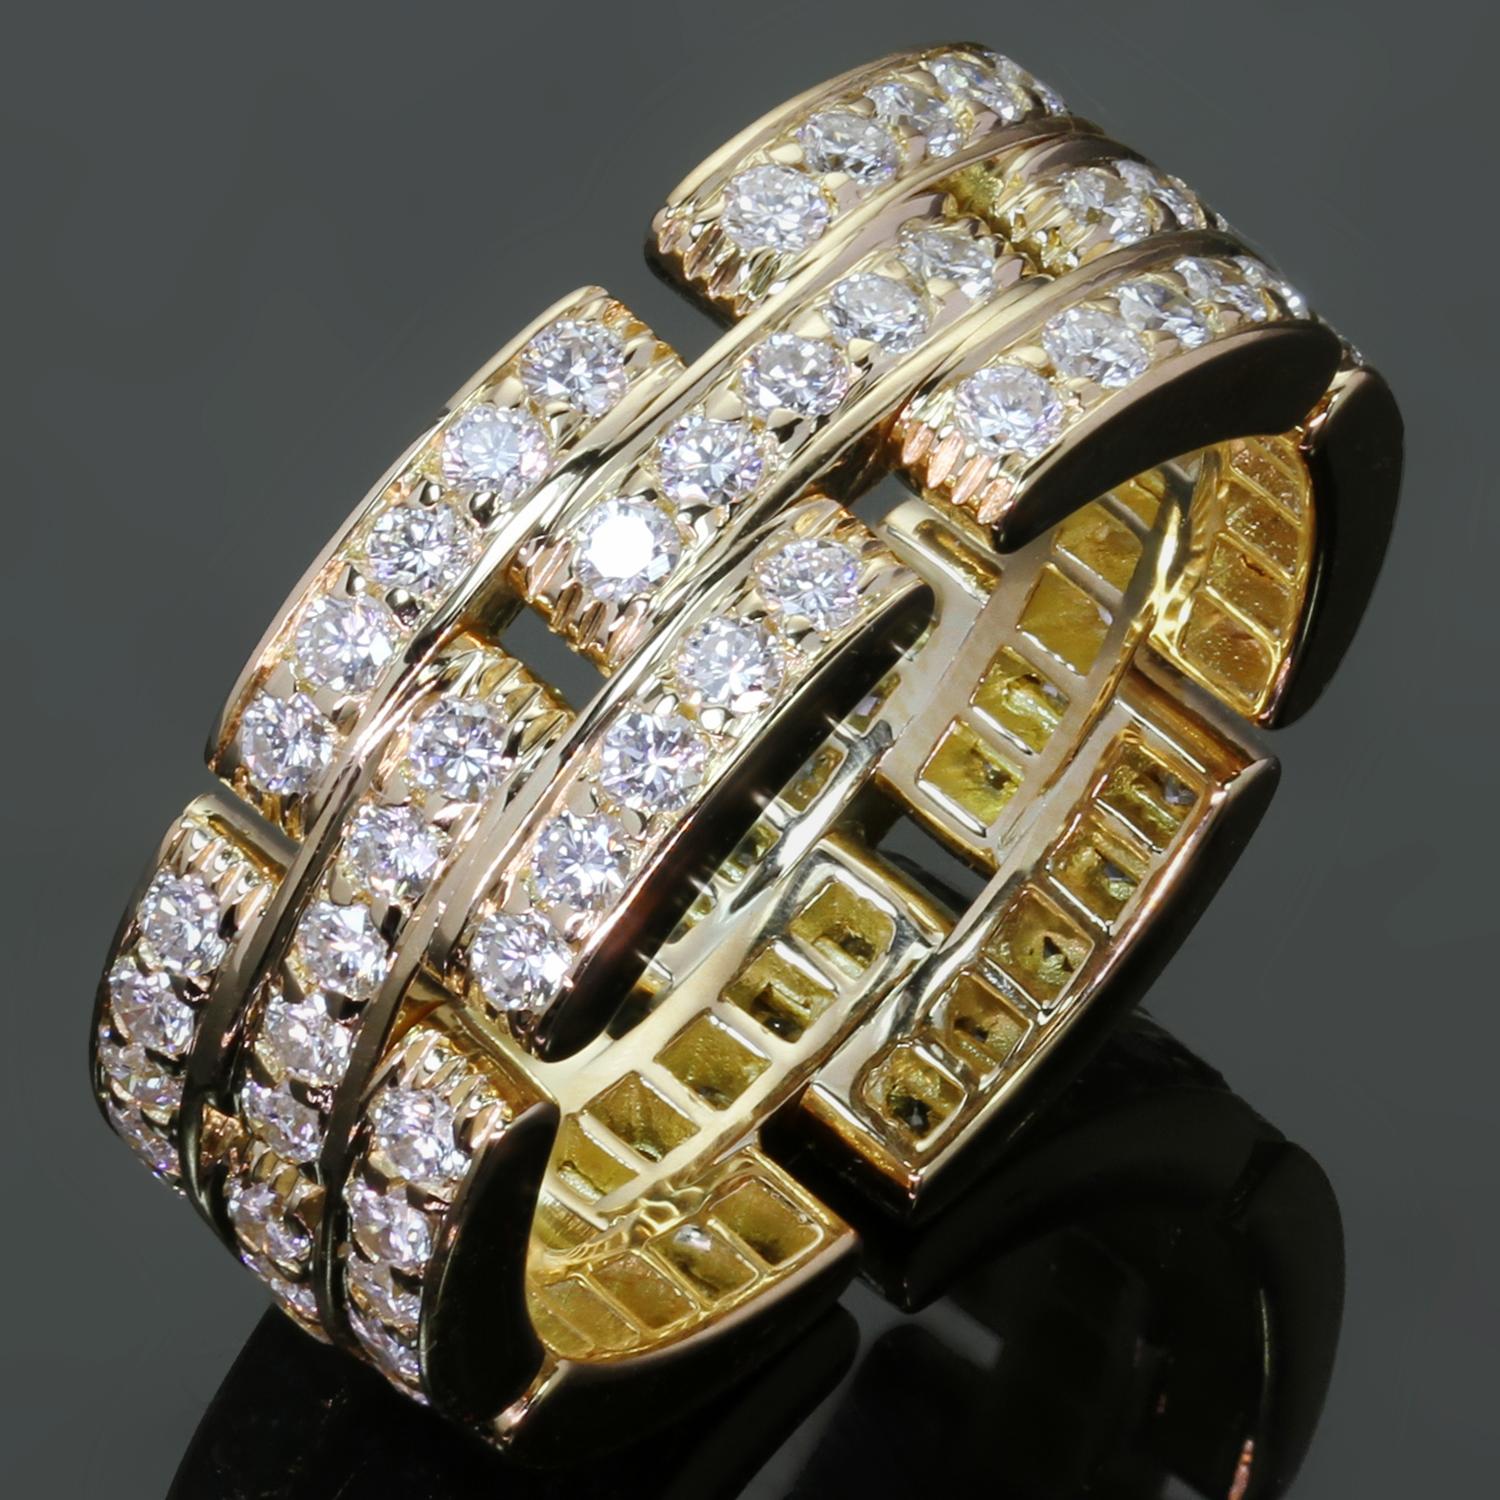 This authentic Cartier band from the iconic Maillon Panthere collection features 3 rows of links crafted in 18k yellow gold links and fully pave-set with brilliant-cut round D-E-F VVS1-VVS2 diamonds of an estimated 1.40 carats. Made in France circa